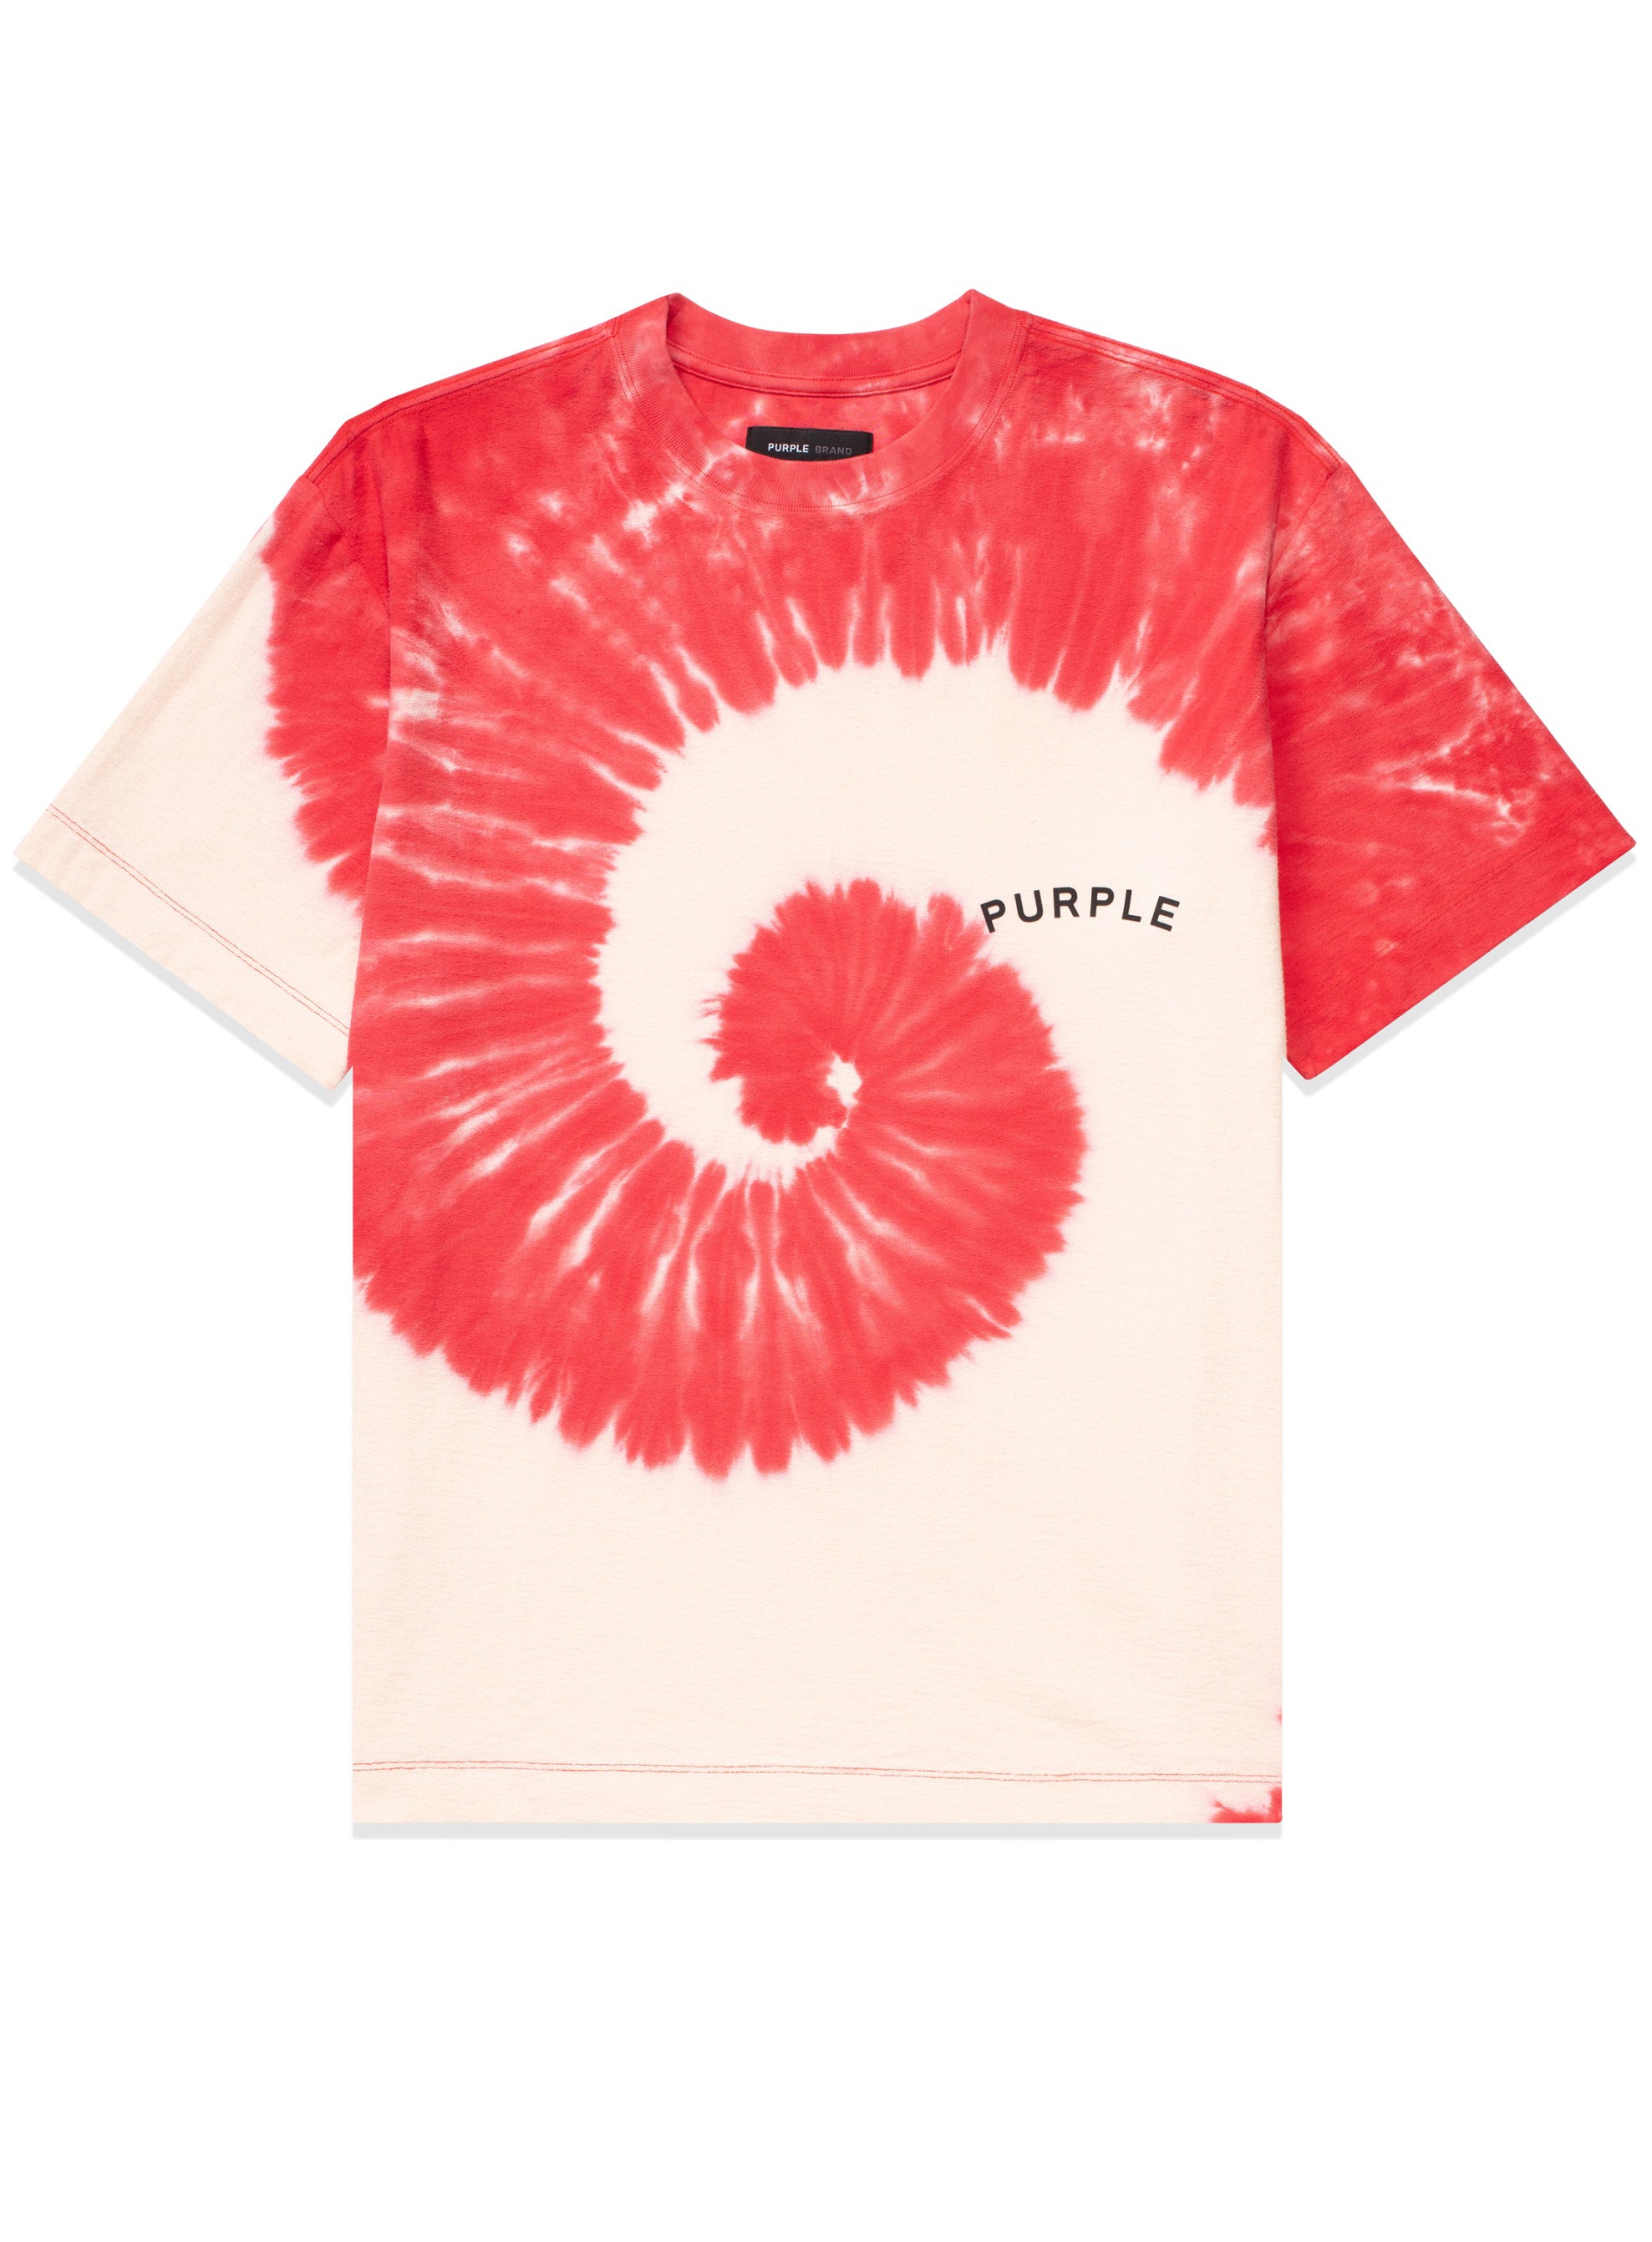 TEXTURED JERSEY SS TEE - RED